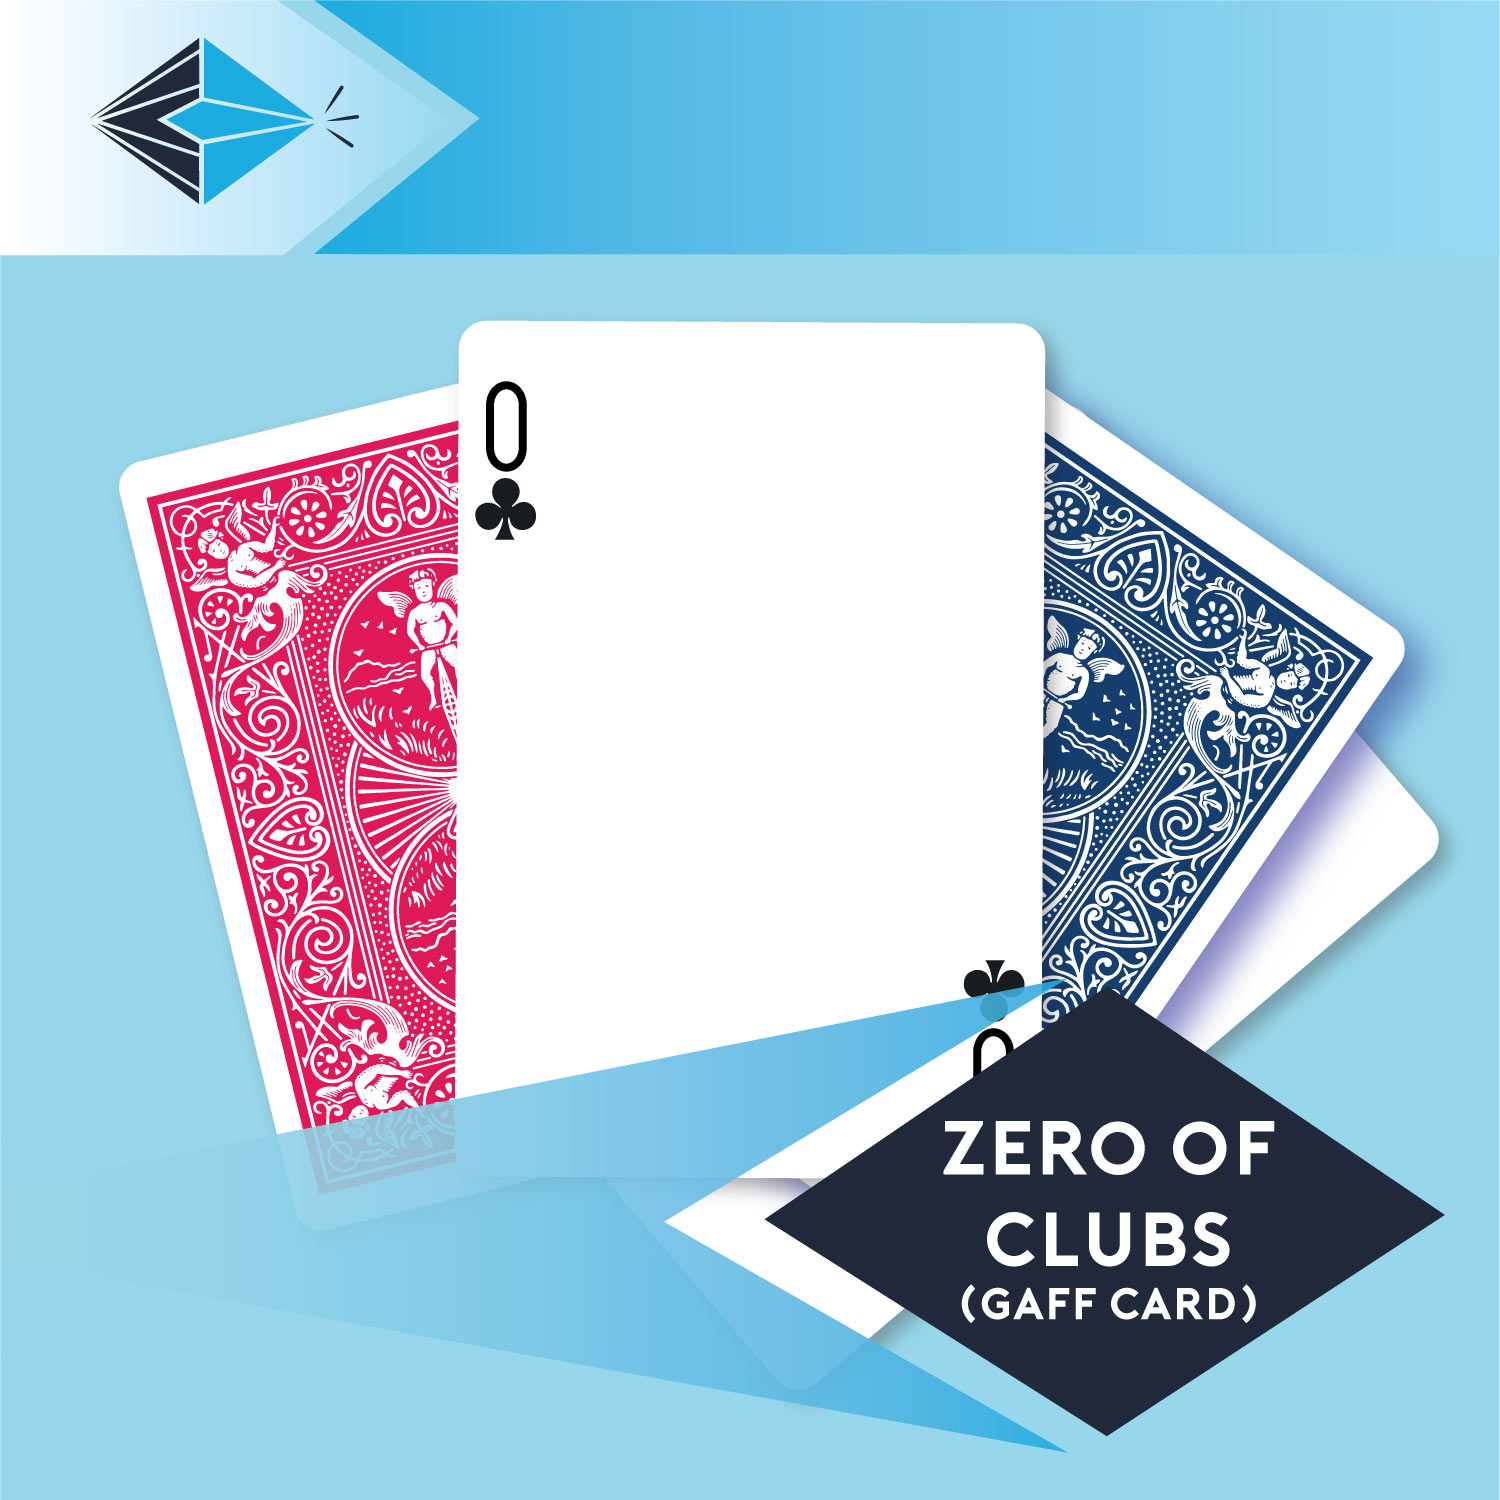 zero of clubs gaff card 19 playing card for magicians printing printers Stockport Manchester UK